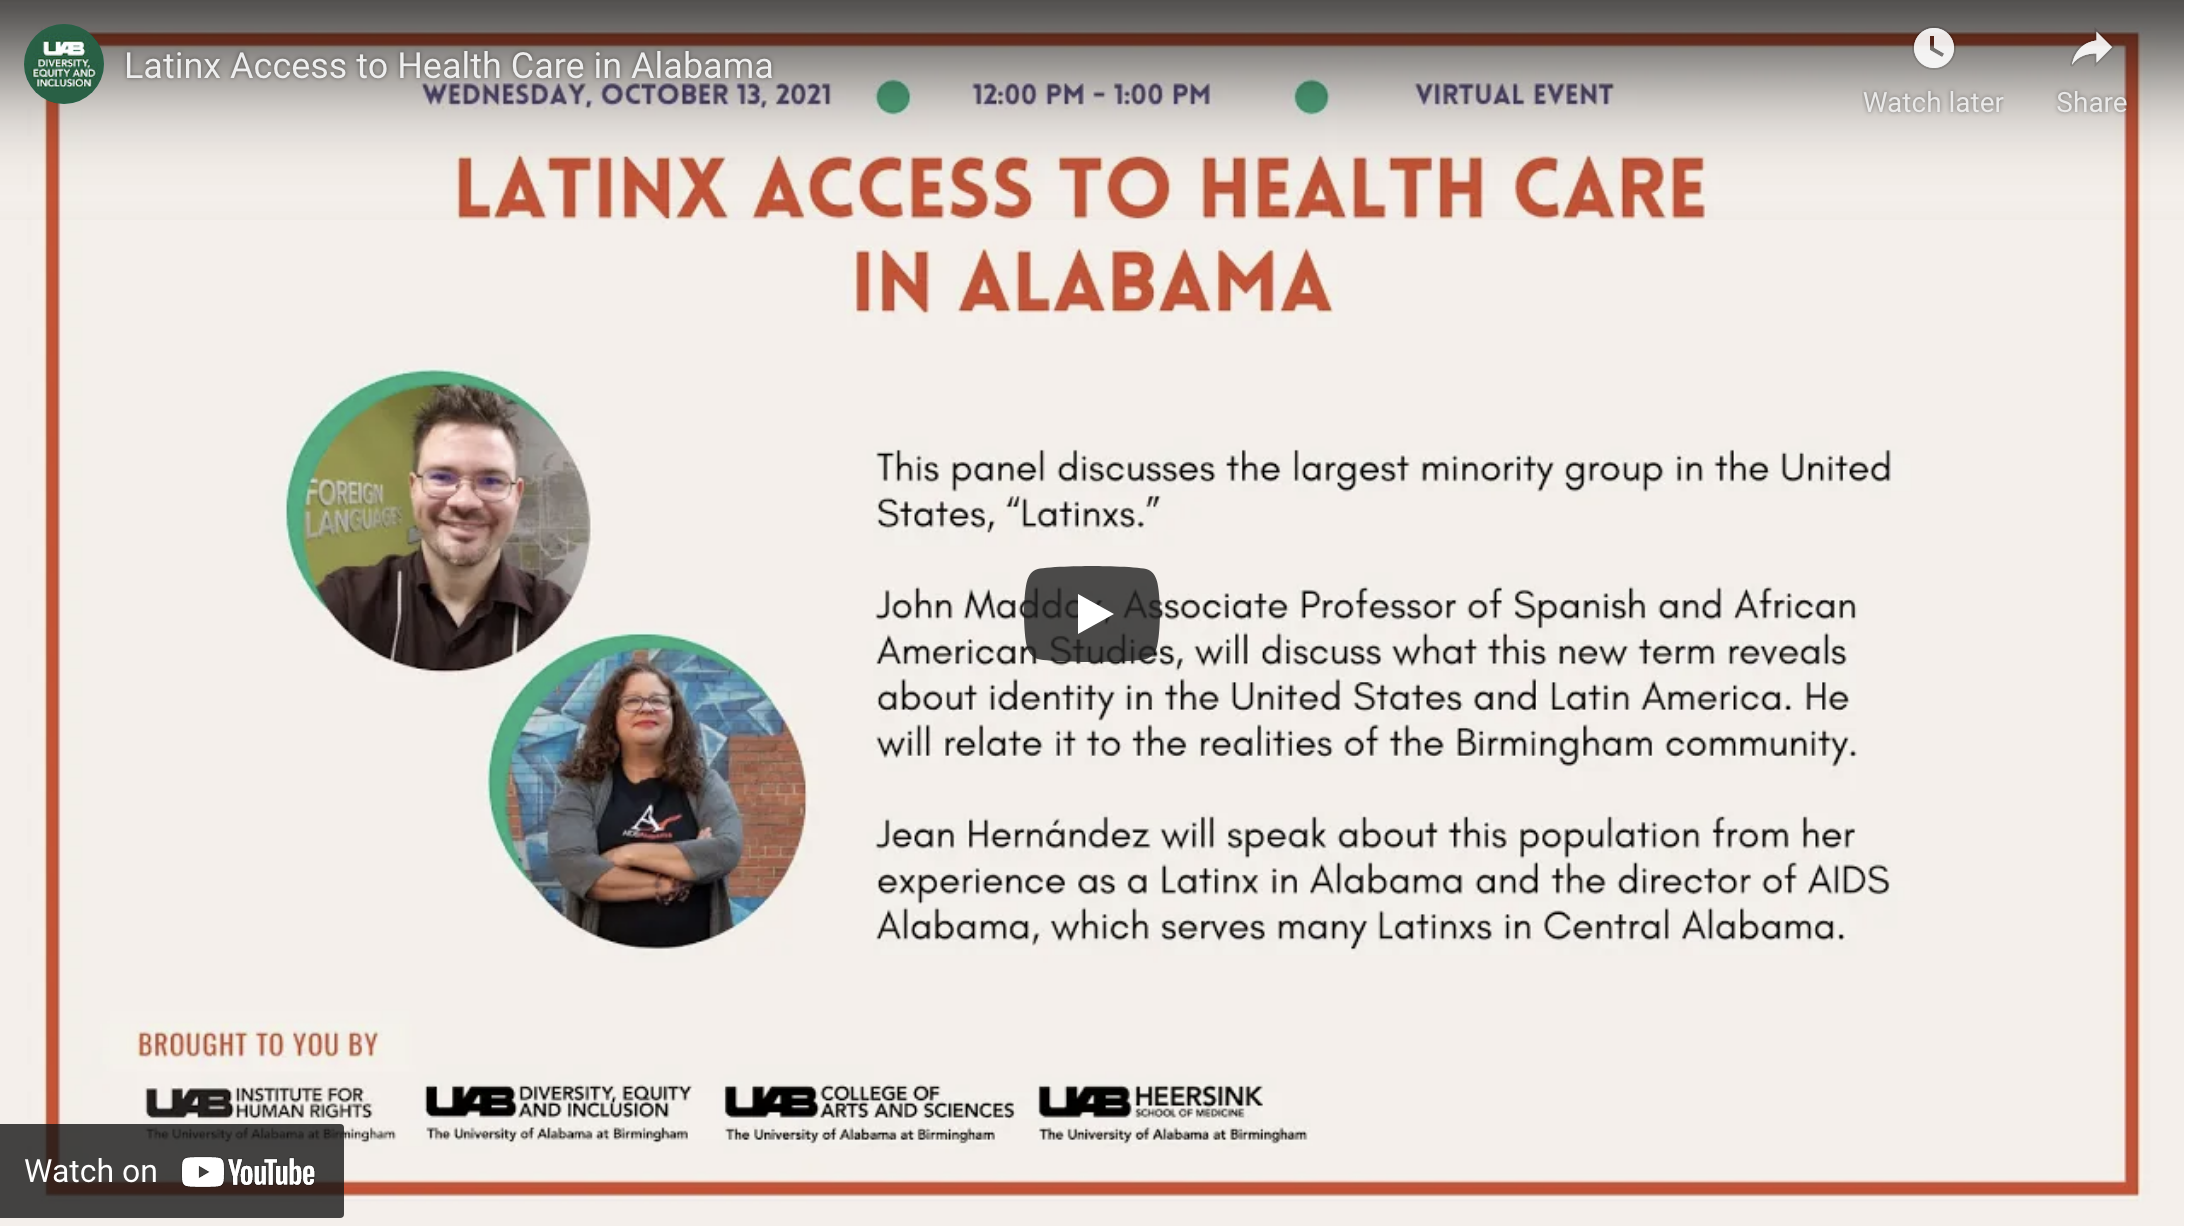 Latinx Access to Health Care in Alabama